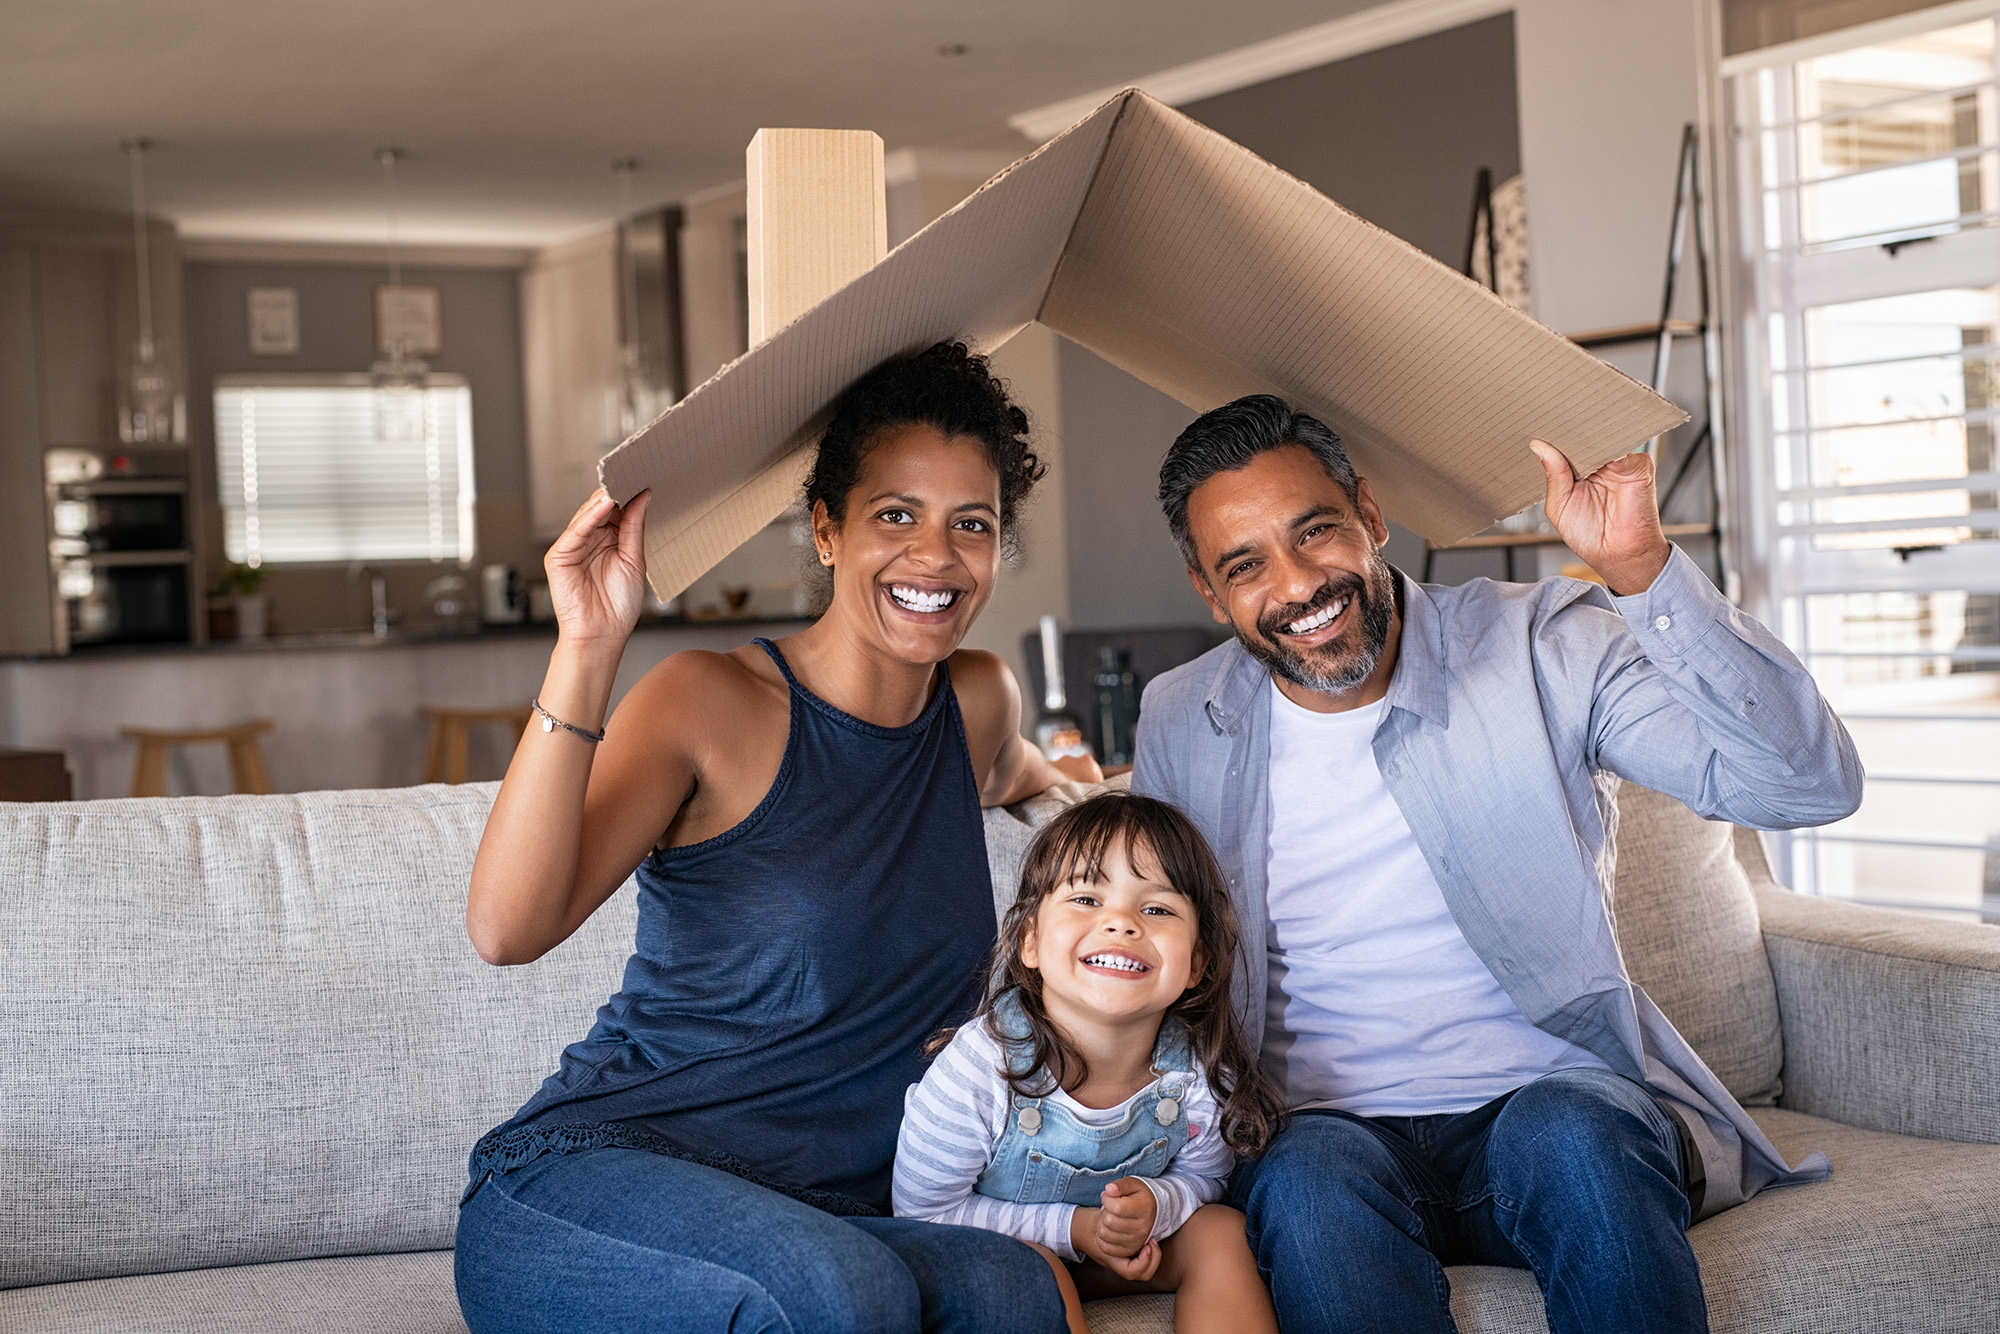 A family of three sitting on a couch with a cardboard box symbolizing a roof over their heads.